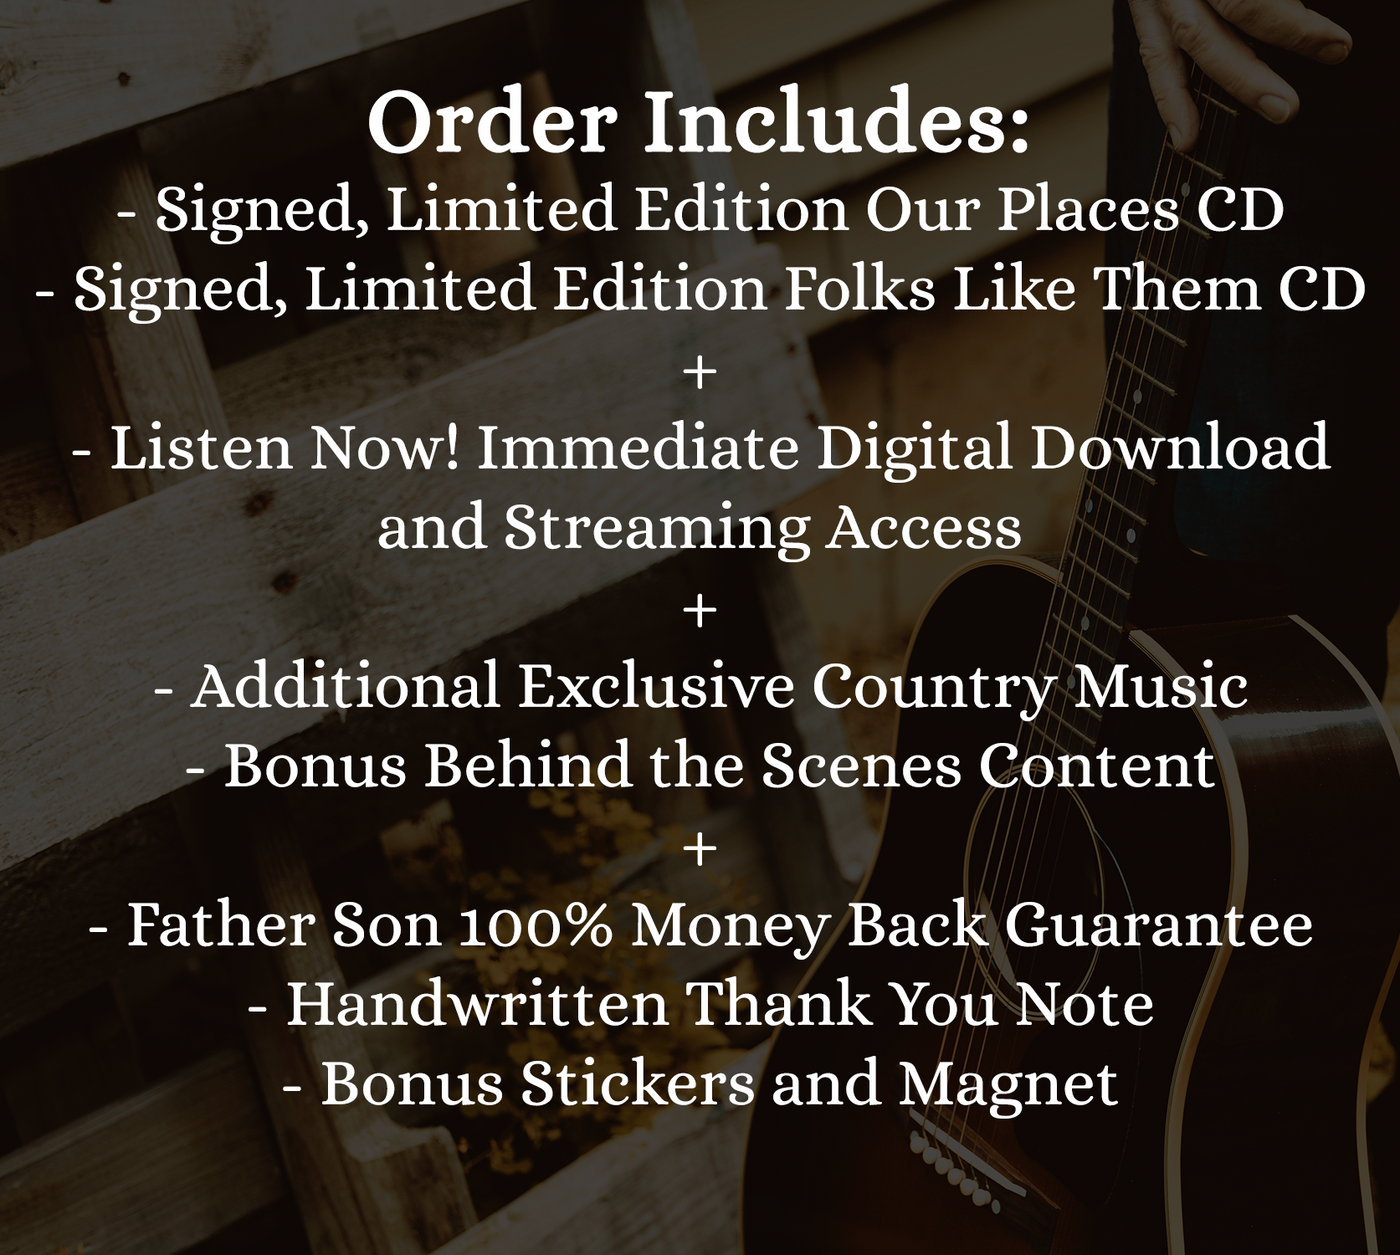 Our Places - Singed, Limited Edition CD (with Bonus CD)